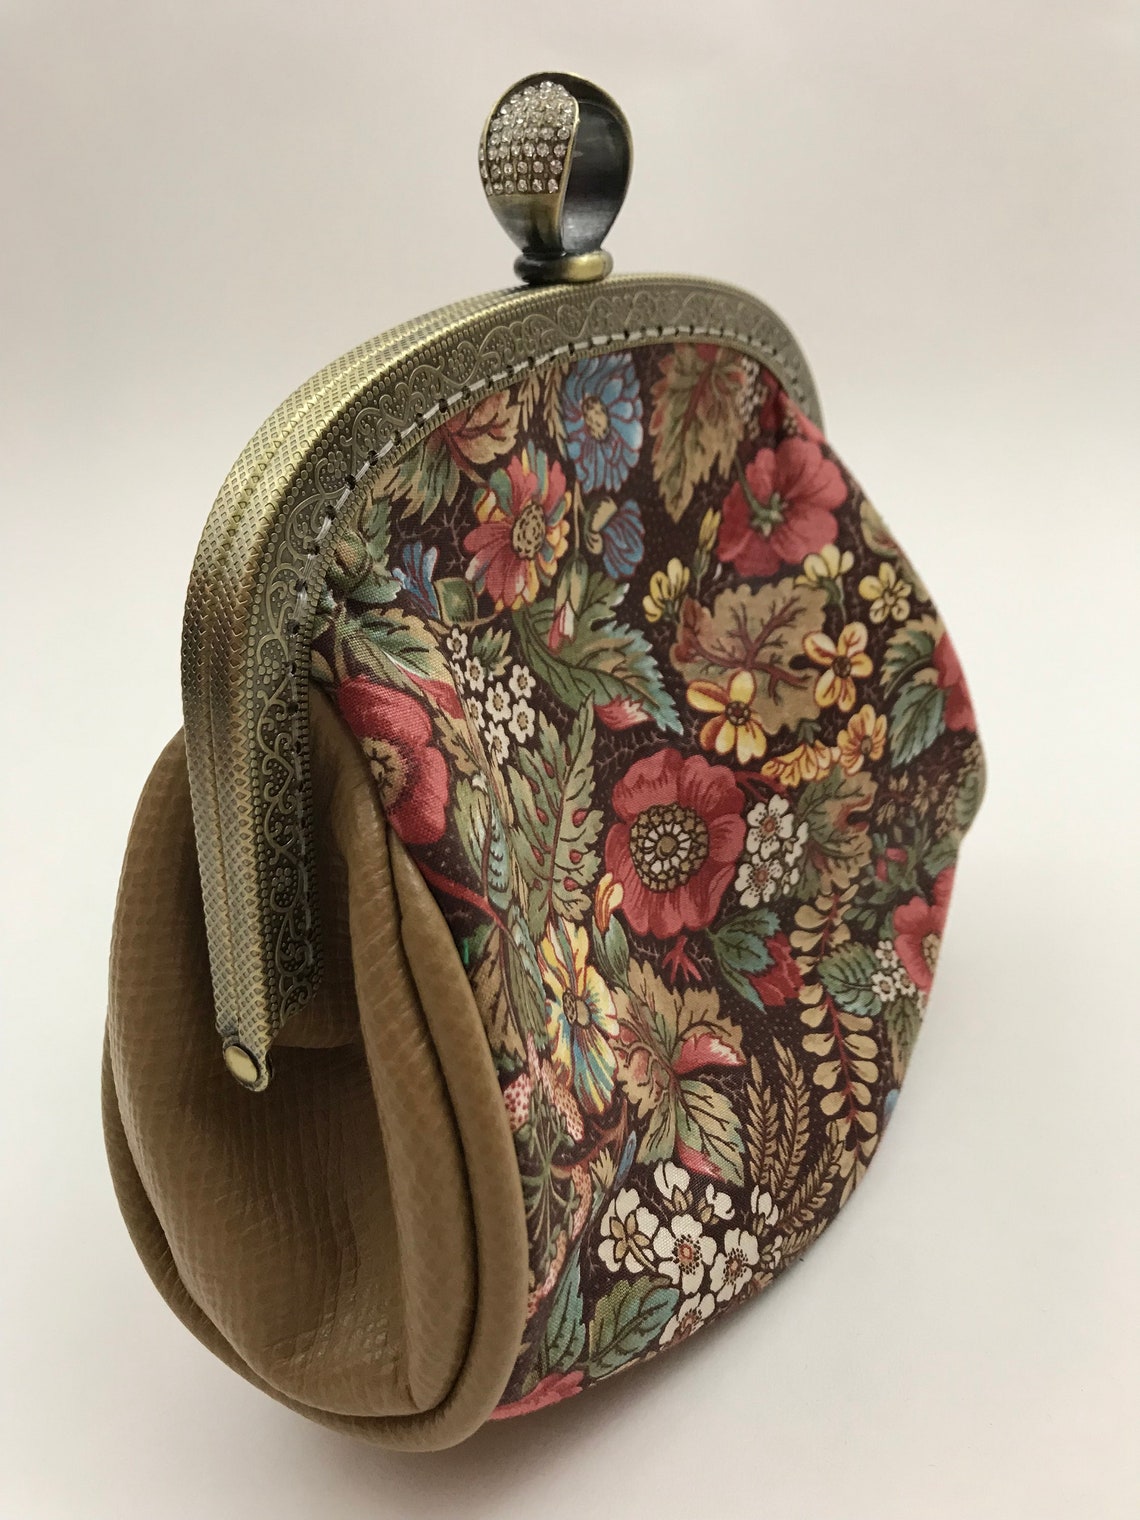 Floral Leather Bag with Clasp Vintage leather bag leather - Etsy.de